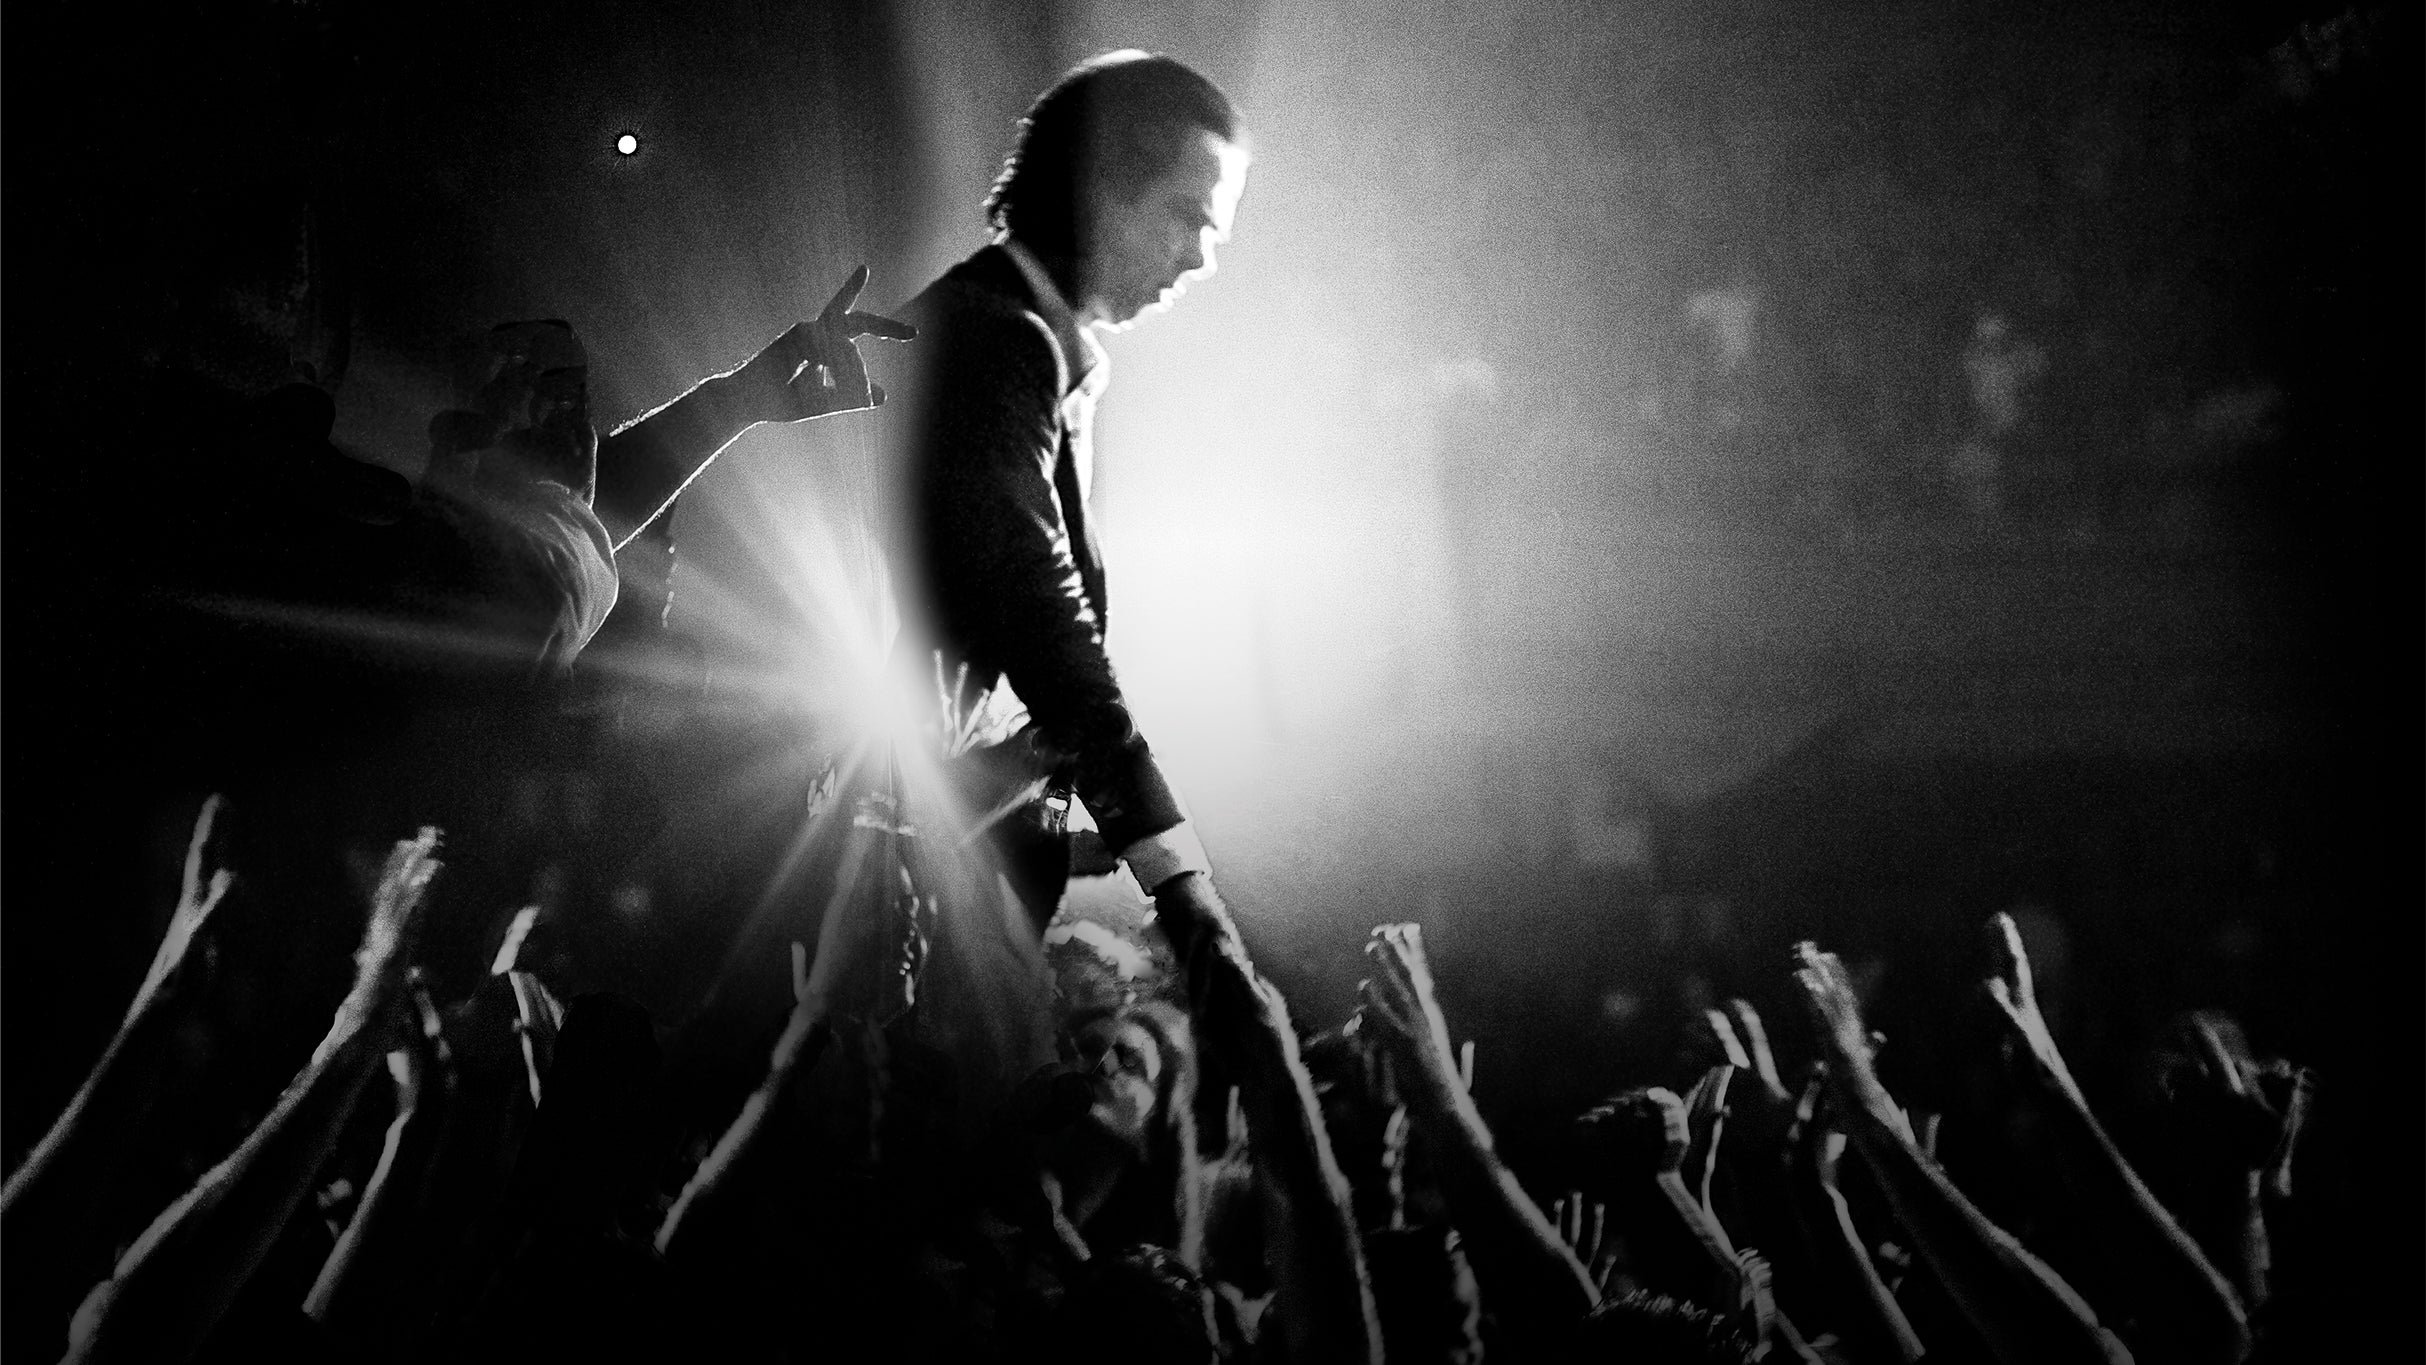 Nick Cave & the Bad Seeds : The Wild God Tour in Glasgow promo photo for Spotify presale offer code